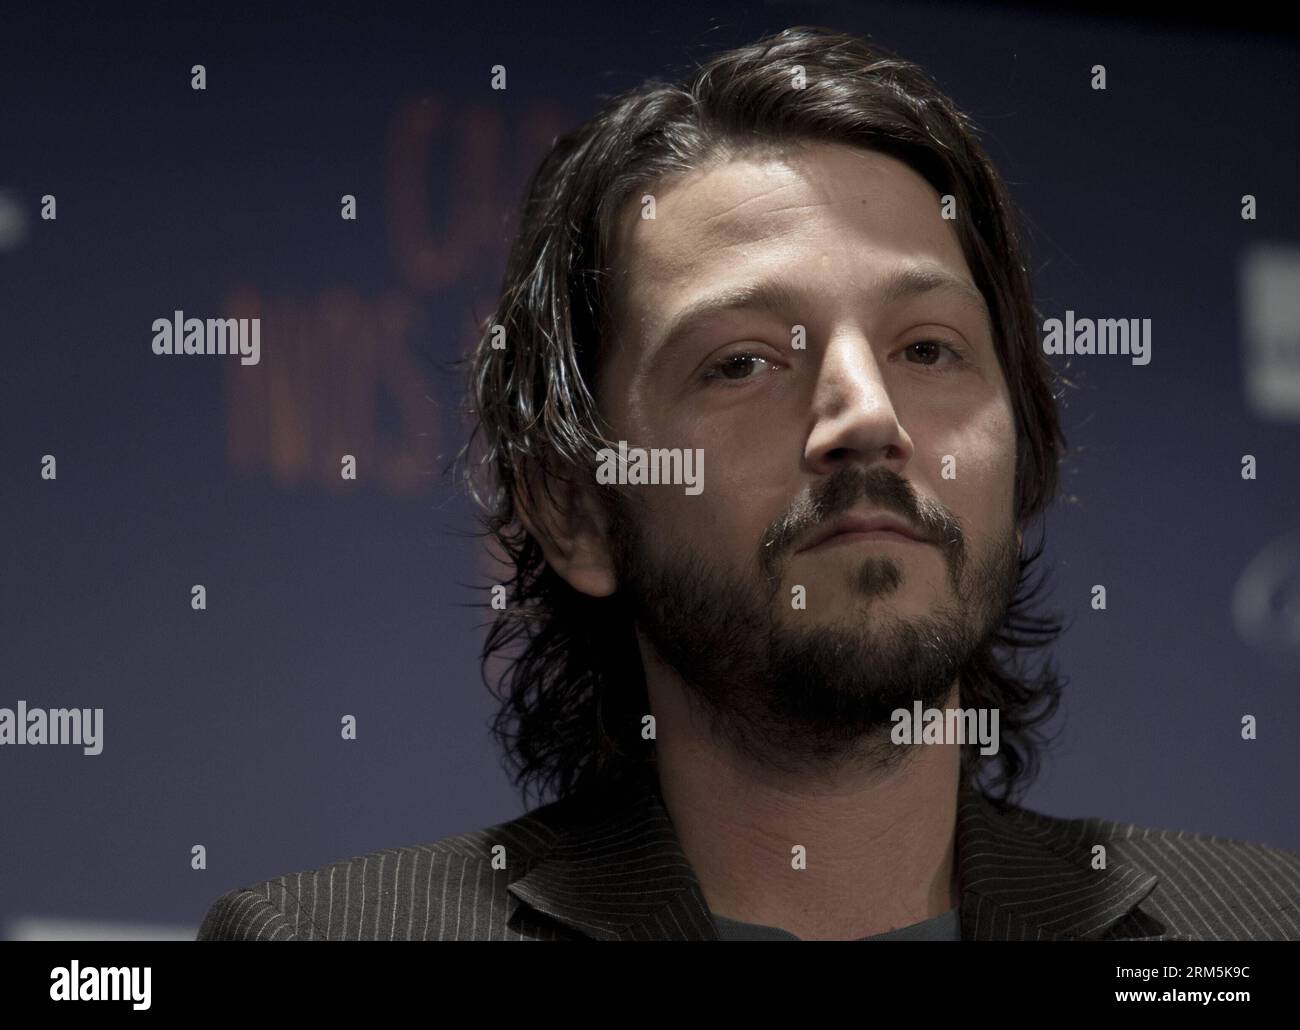 Bildnummer: 60679955  Datum: 05.11.2013  Copyright: imago/Xinhua MEXICO CITY, Nov. 5, 2013 (Xinhua) -- Mexican actor Diego Luna reacts during a press conference to announce his participation in the theater play Cada Vez Nos Despedimos Mejor , in Mexico City, capital of Mexico, on Nov. 5, 2013. (Xinhua/Alejandro Ayala) MEXICO-MEXICO CITY-ENTERTAINMENT-DIEGO LUNA PUBLICATIONxNOTxINxCHN Entertainment People x0x xkg 2013 quer     60679955 Date 05 11 2013 Copyright Imago XINHUA Mexico City Nov 5 2013 XINHUA MEXICAN Actor Diego Luna reacts during a Press Conference to Announce His participation in T Stock Photo